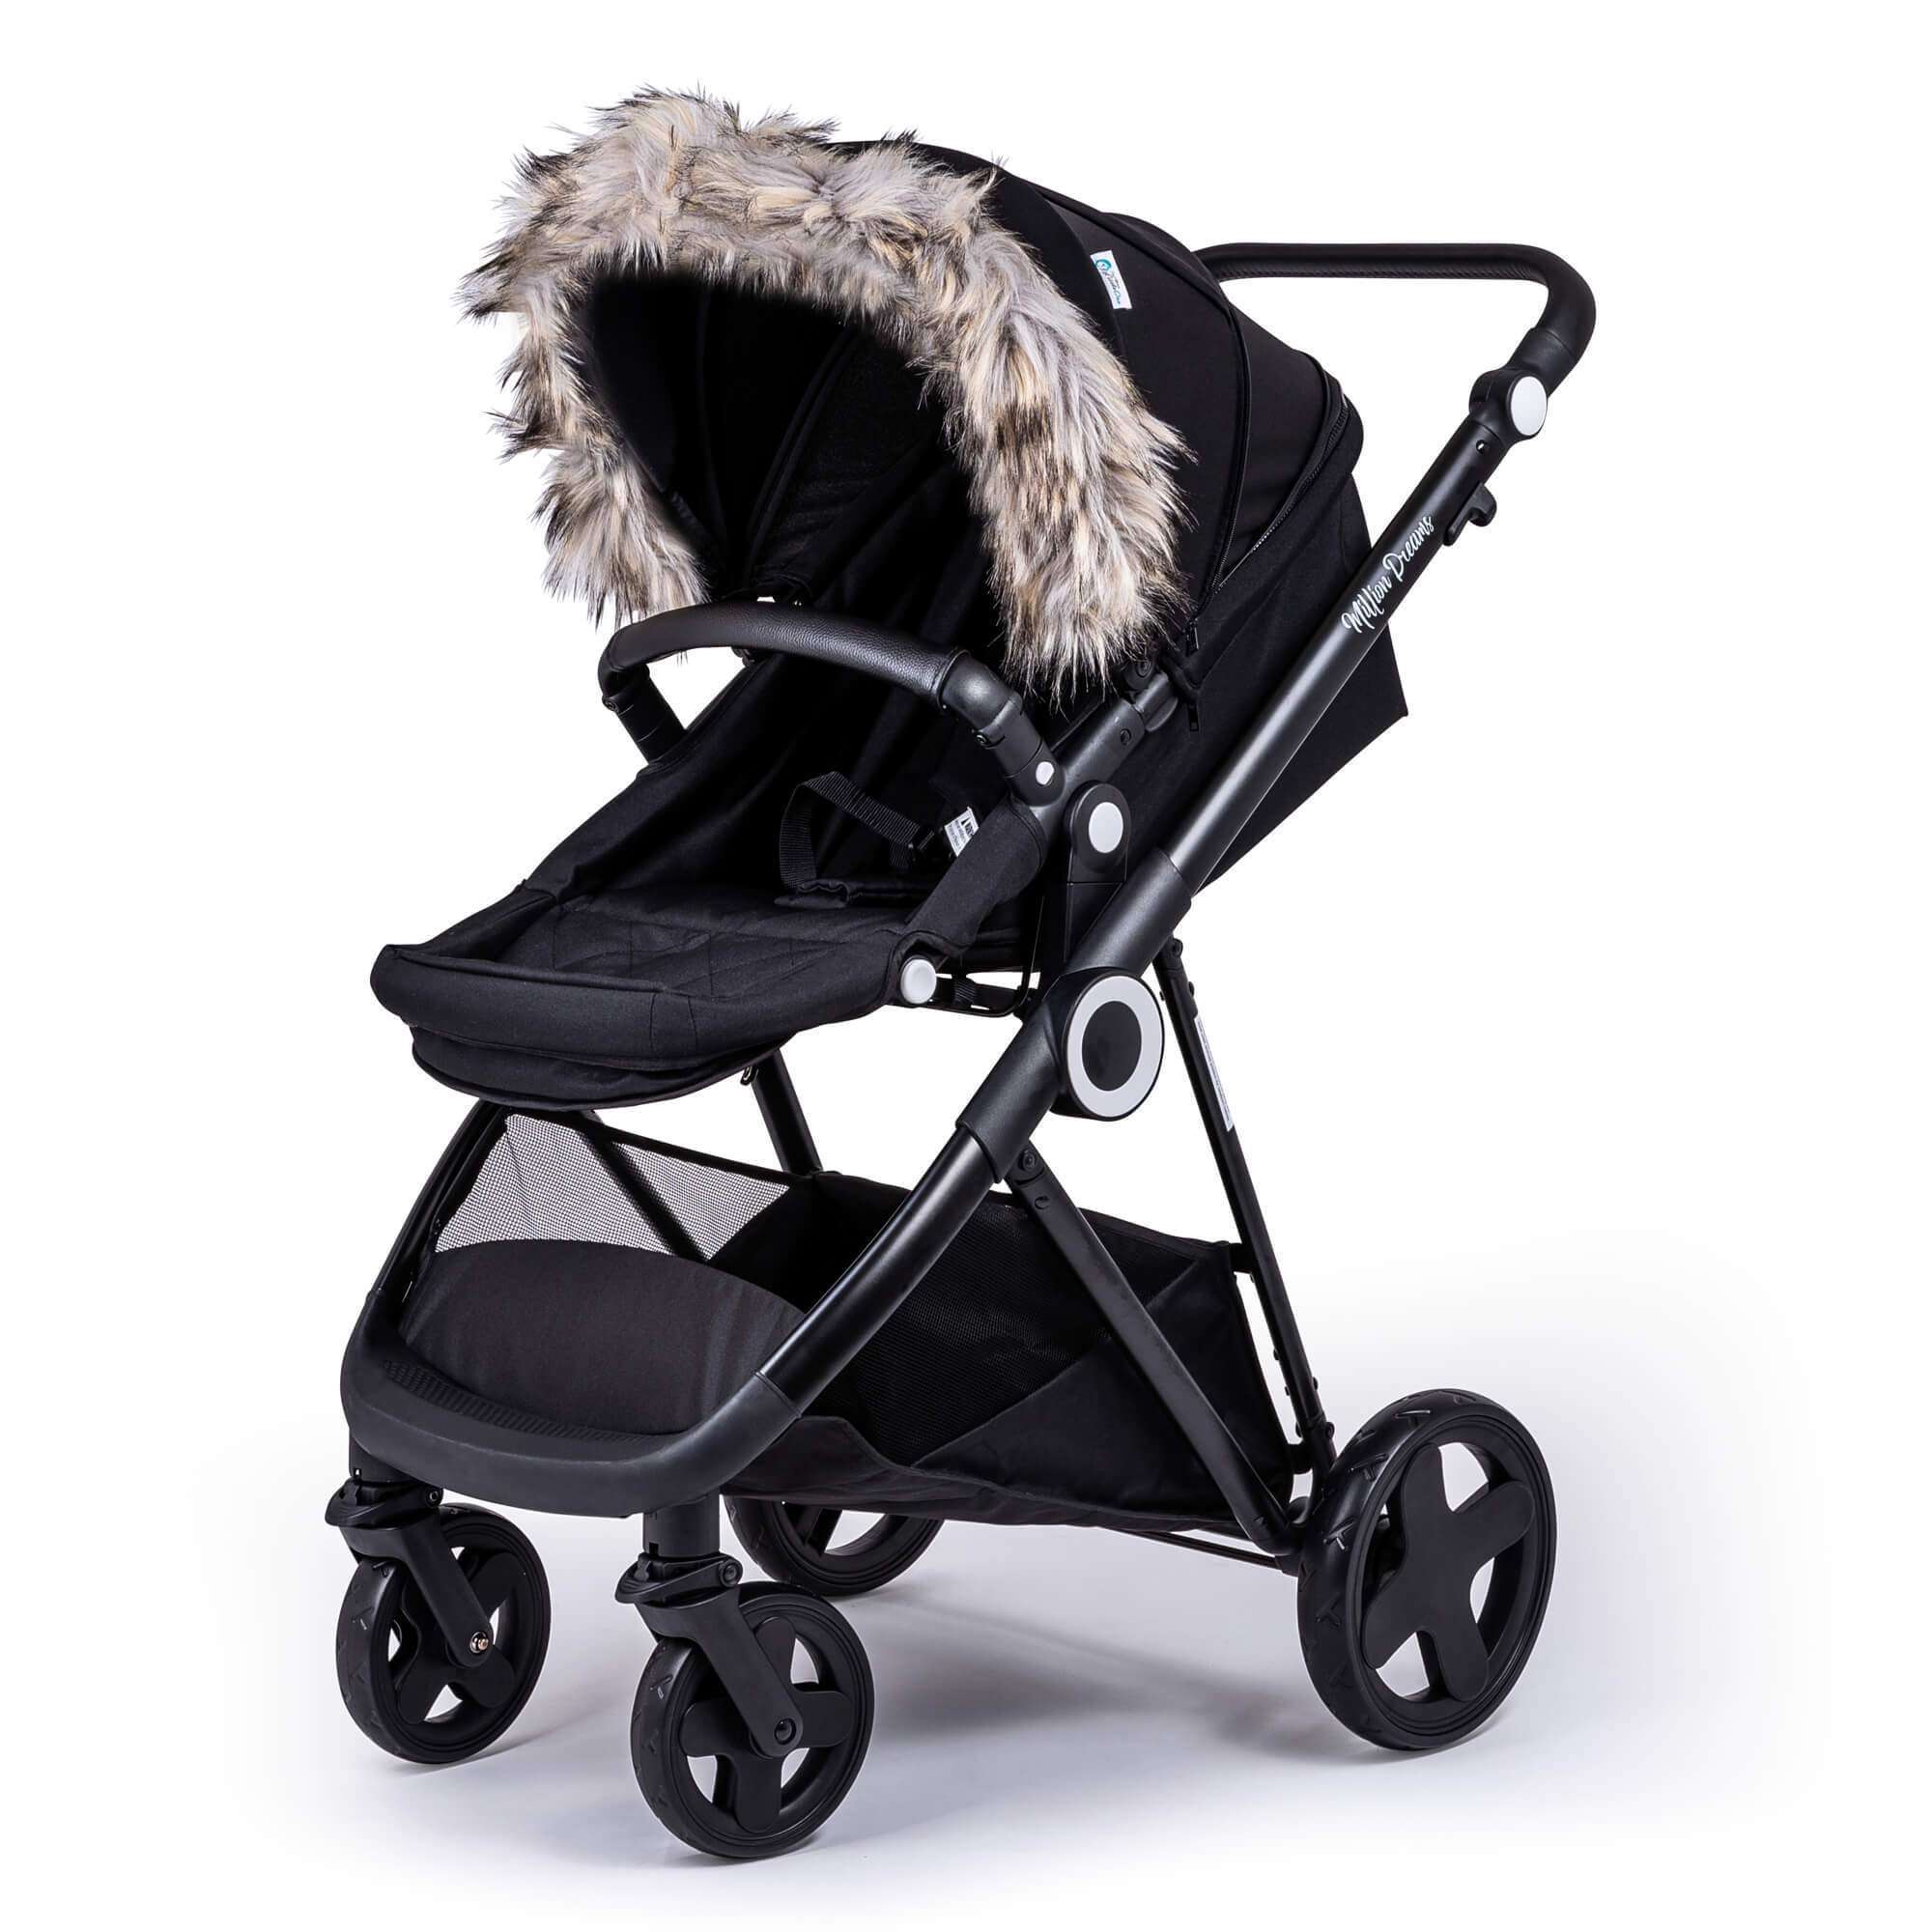 Pram Fur Hood Trim Attachment for Pushchair Compatible with BabyCare - For Your Little One